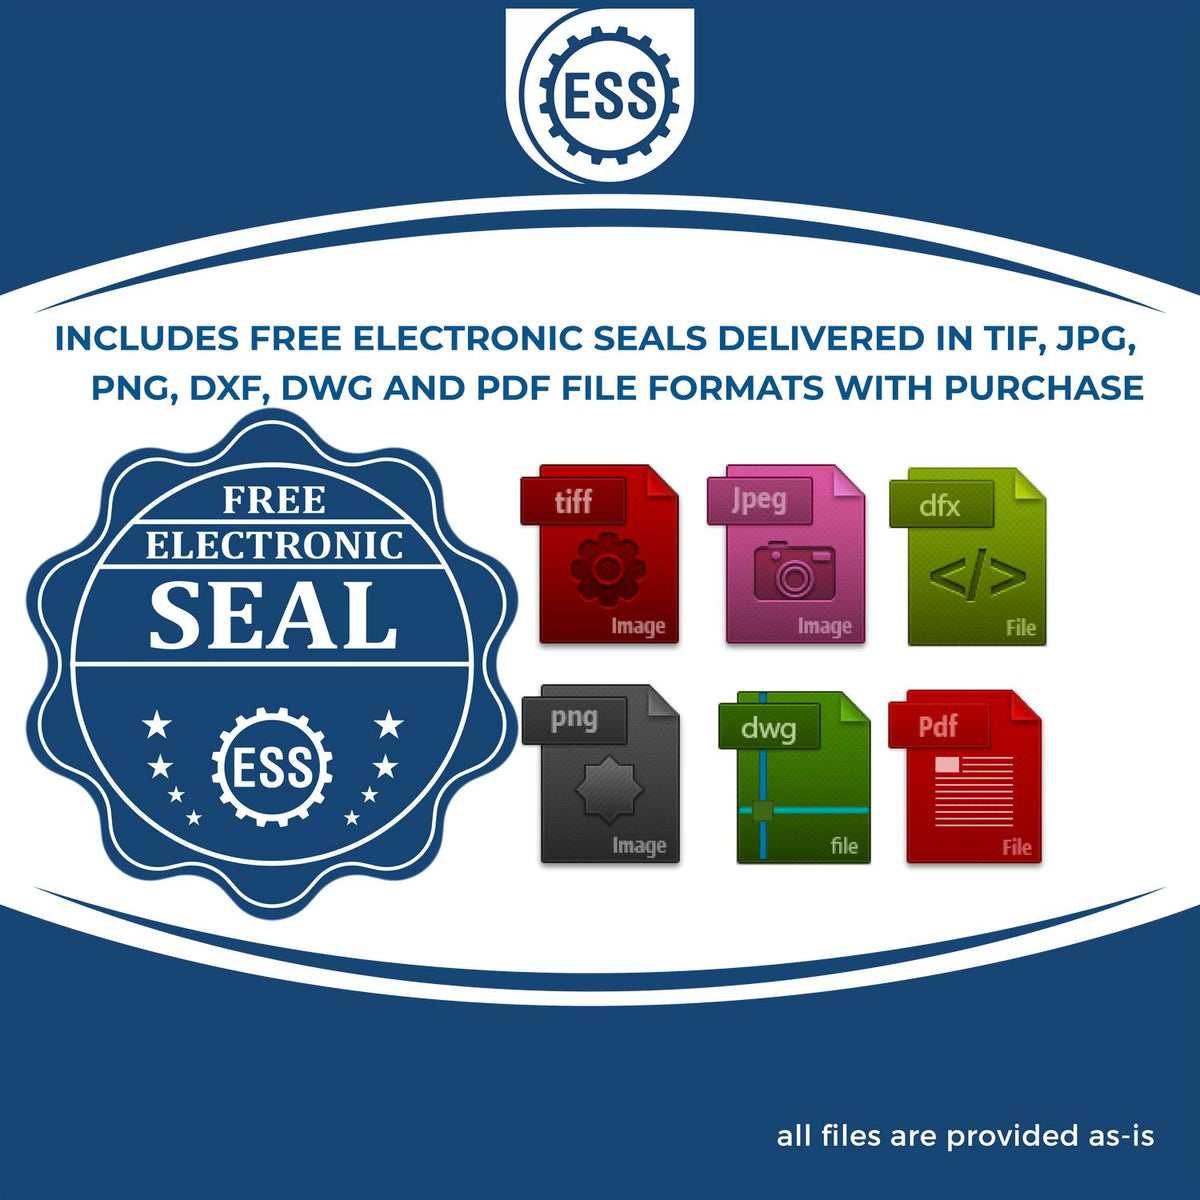 An infographic for the free electronic seal for the Heavy-Duty Texas Rectangular Notary Stamp illustrating the different file type icons such as DXF, DWG, TIF, JPG and PNG.